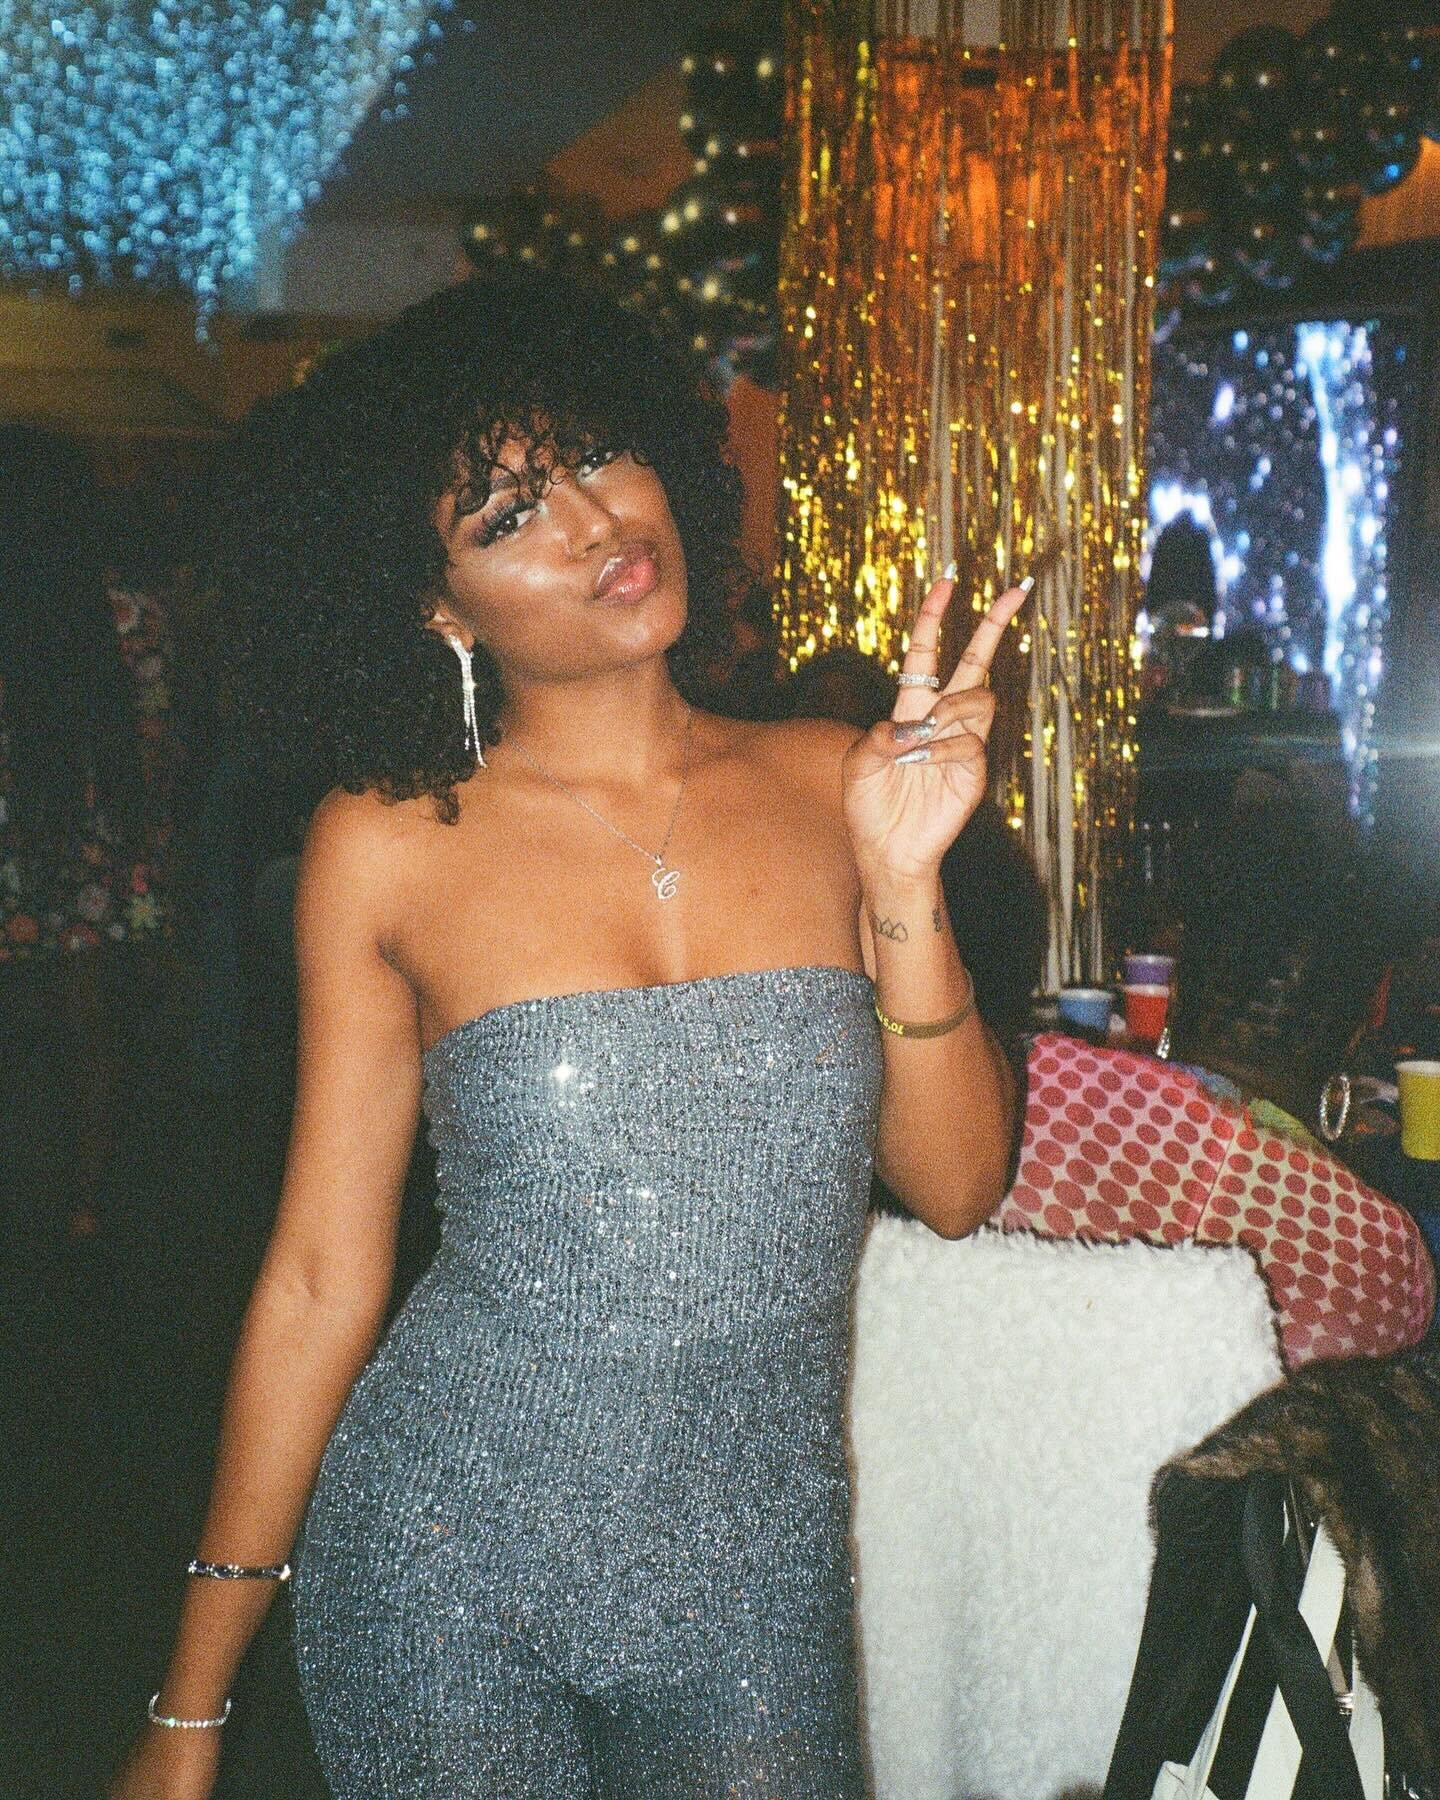 Brought in the NEW YEAR partying like it was the 70&rsquo;s
@daronthechef NYE party shot on film 🎞️